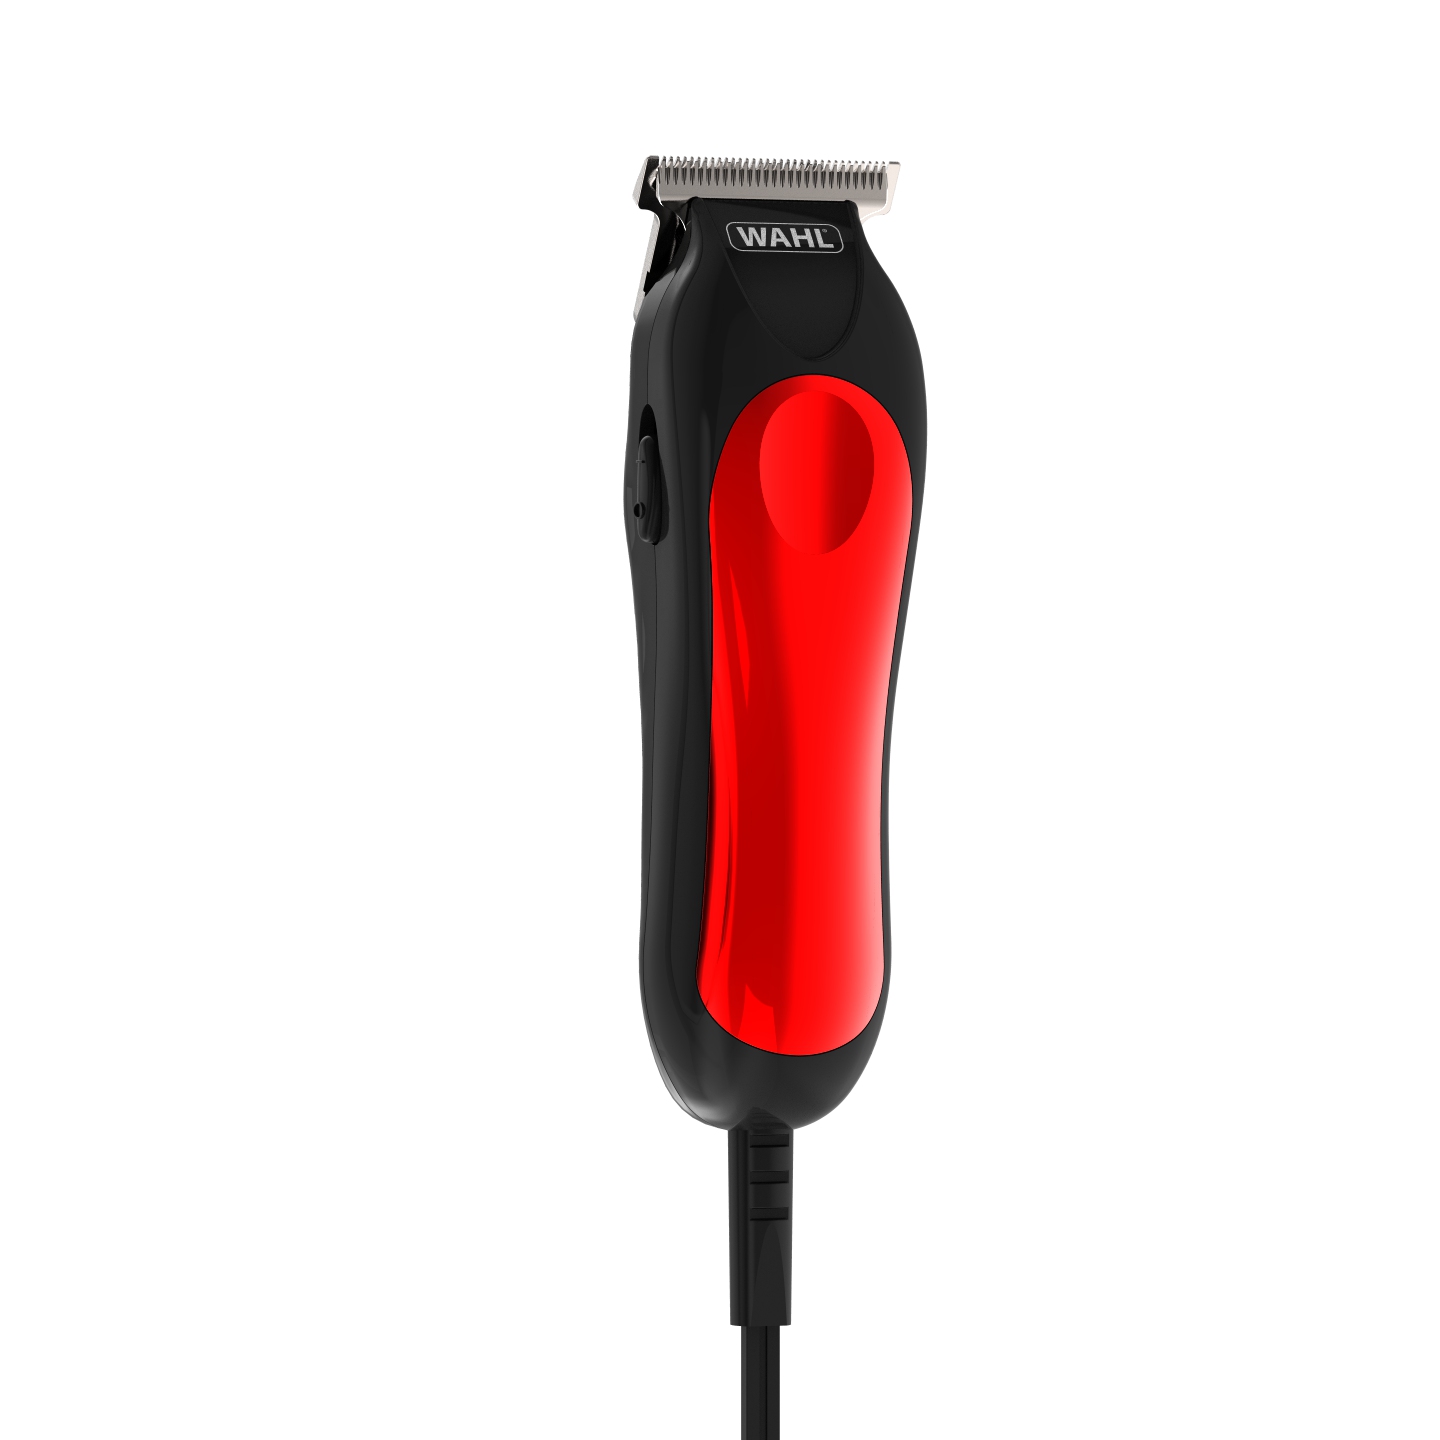 detailing hair clippers